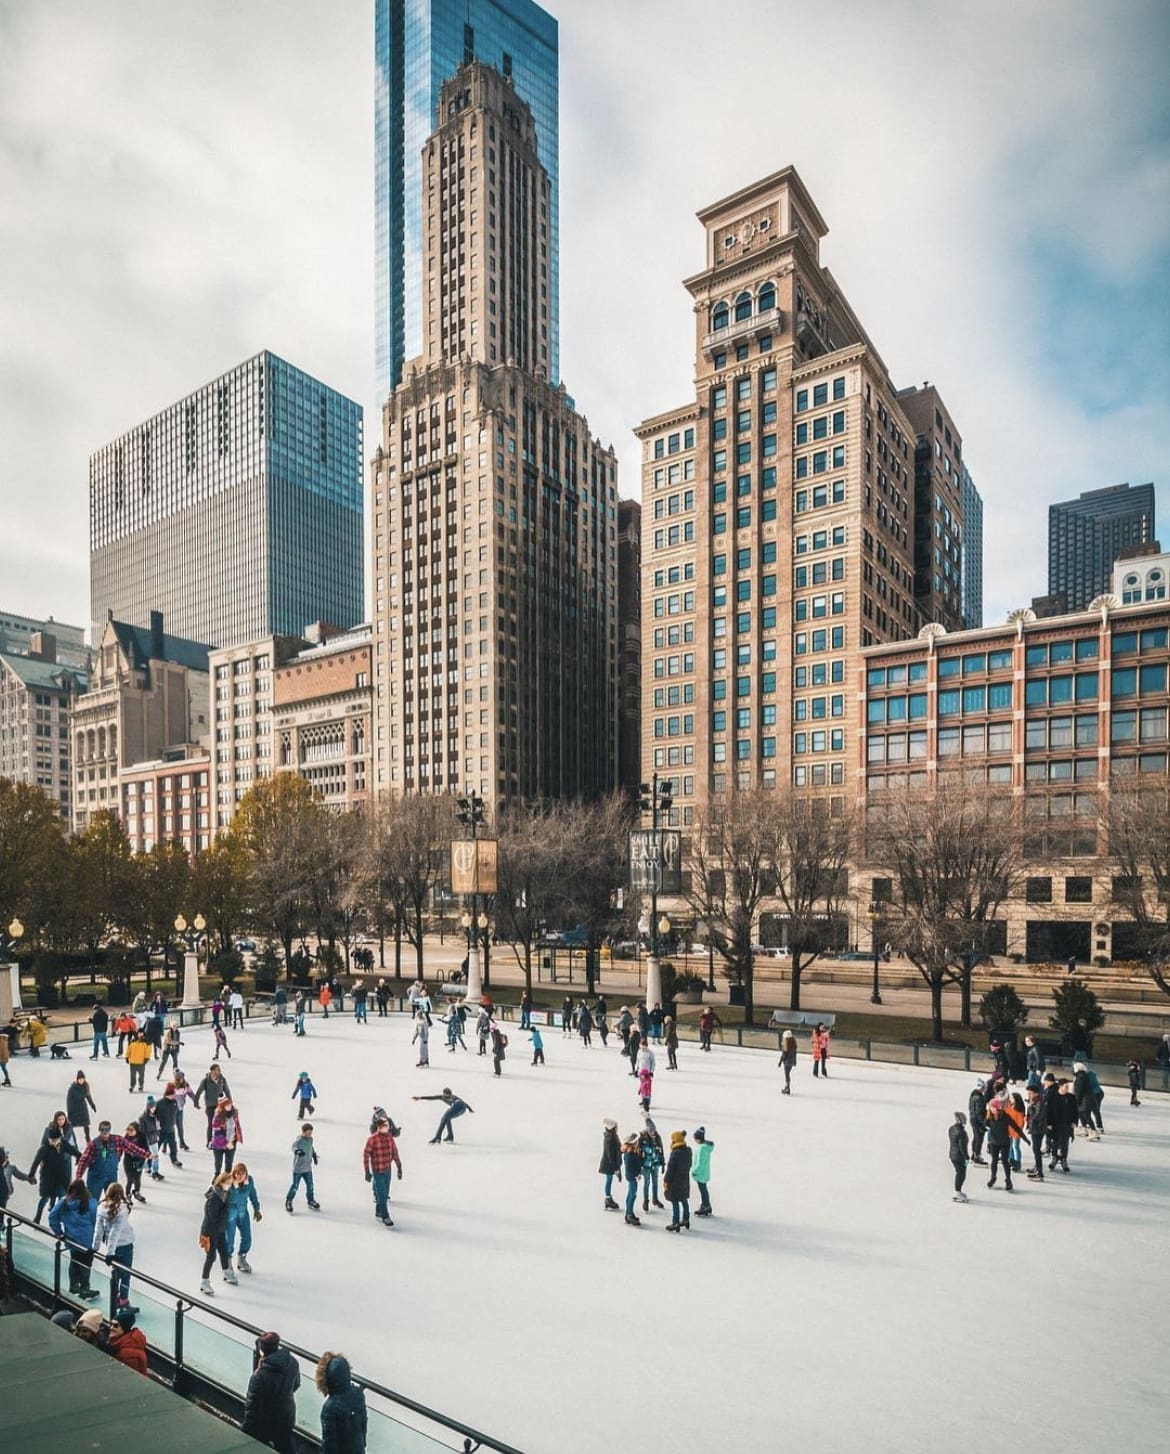 Ice Skating at Millennium Park - The 20 Best Things to Do in Chicago in Winter